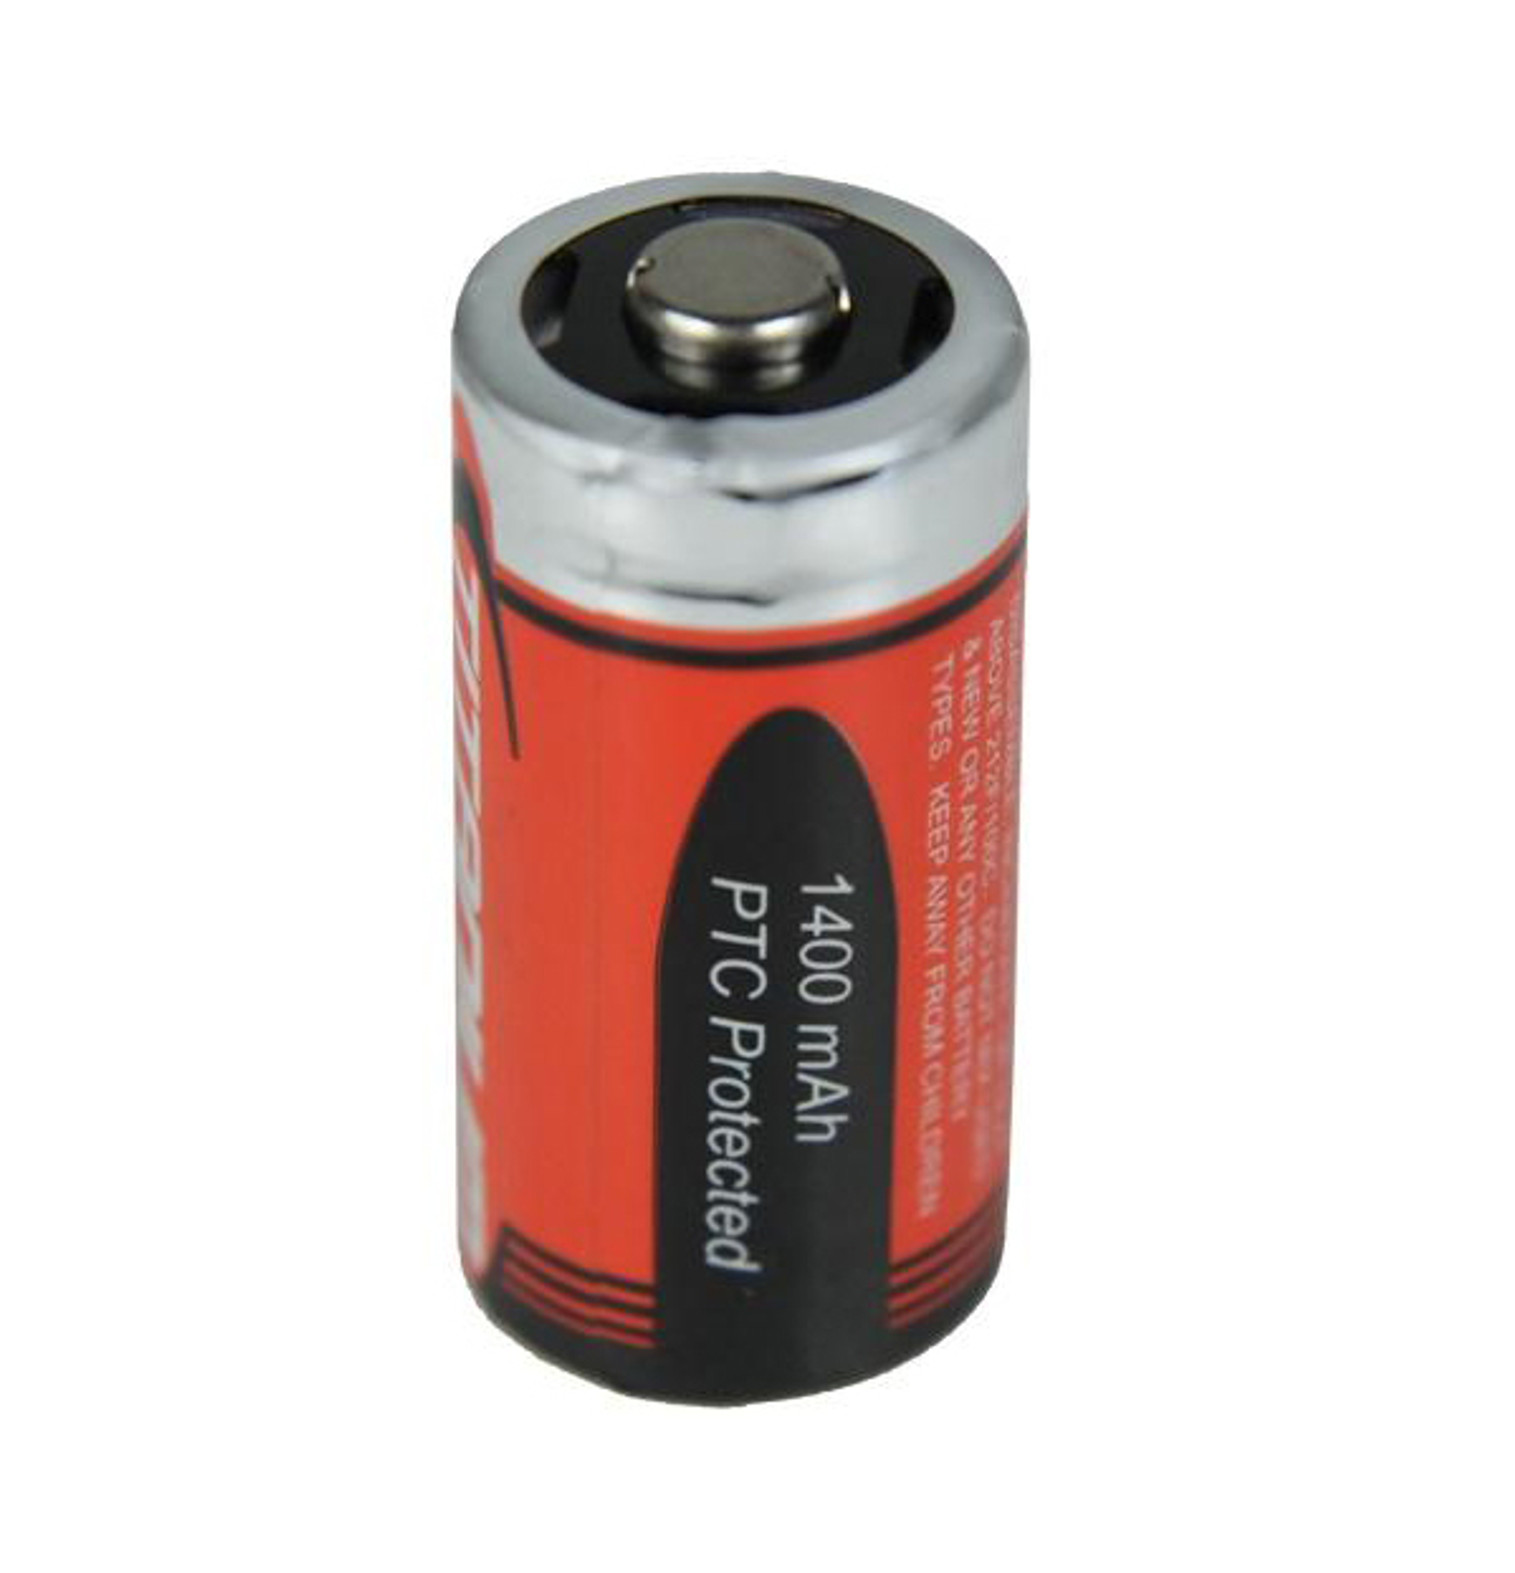 CR123 3 volts Lithium Battery - 1pc